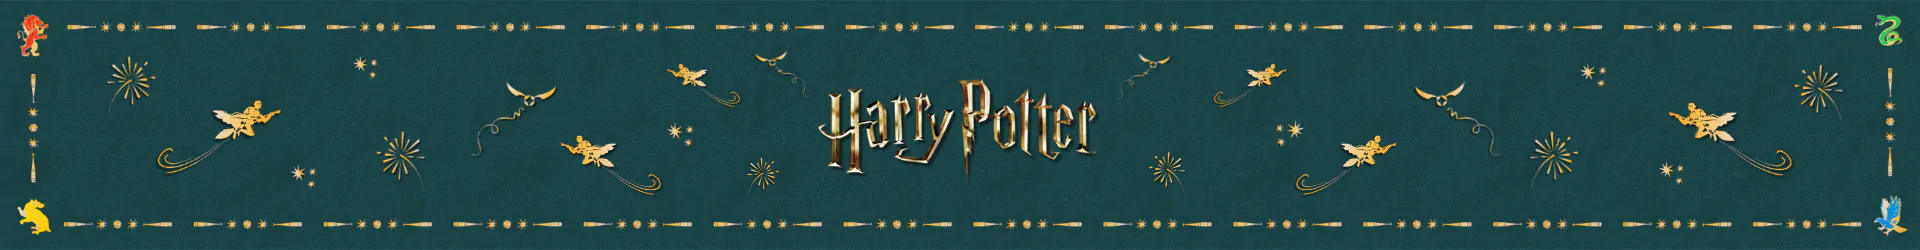 Harry Potter products banner